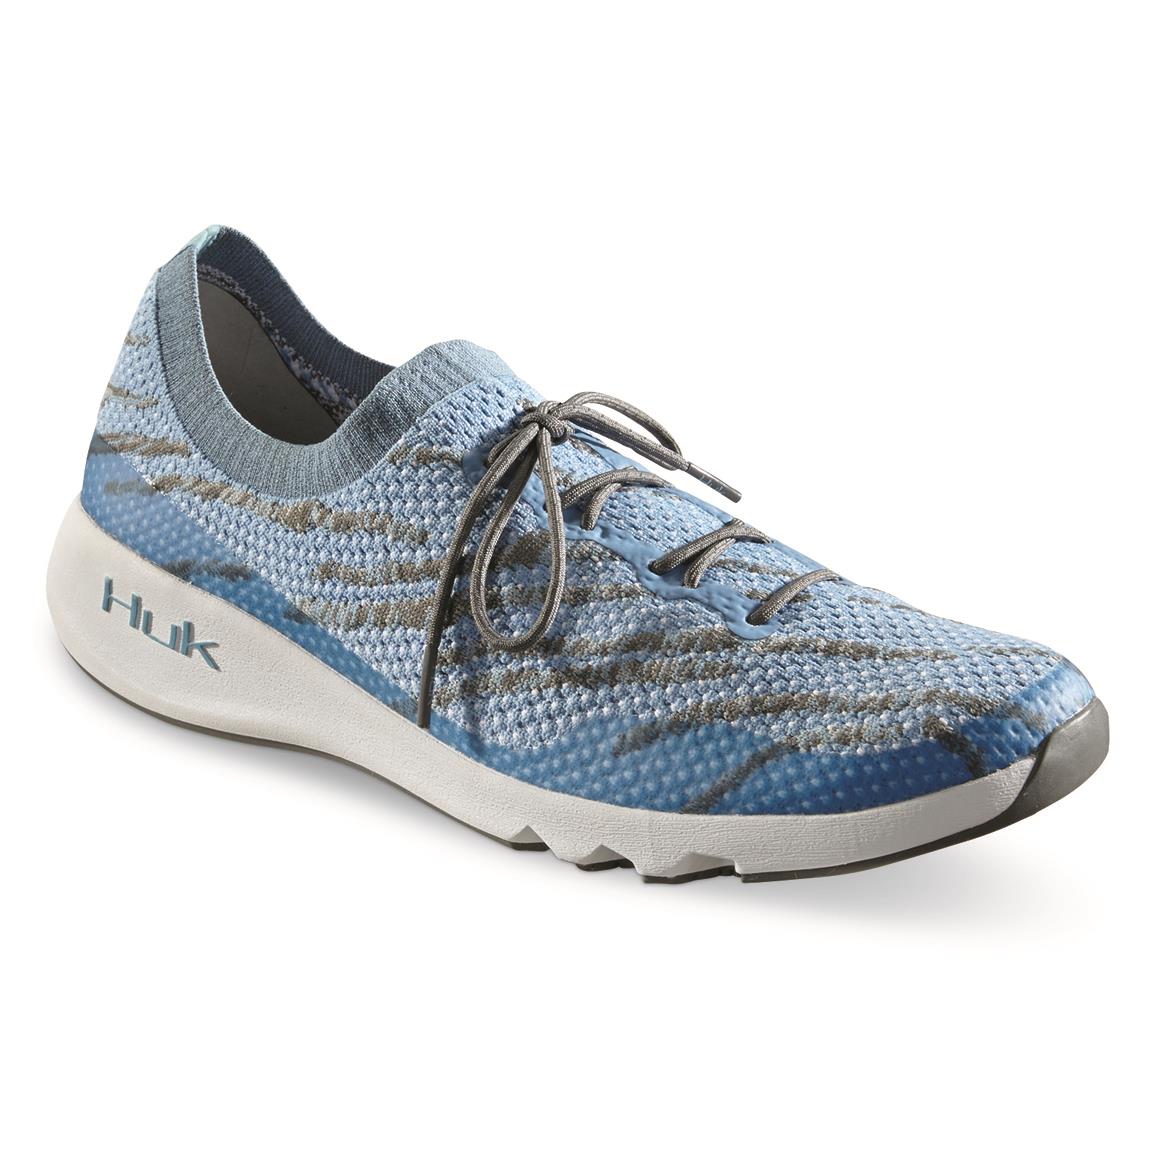 huk water shoes